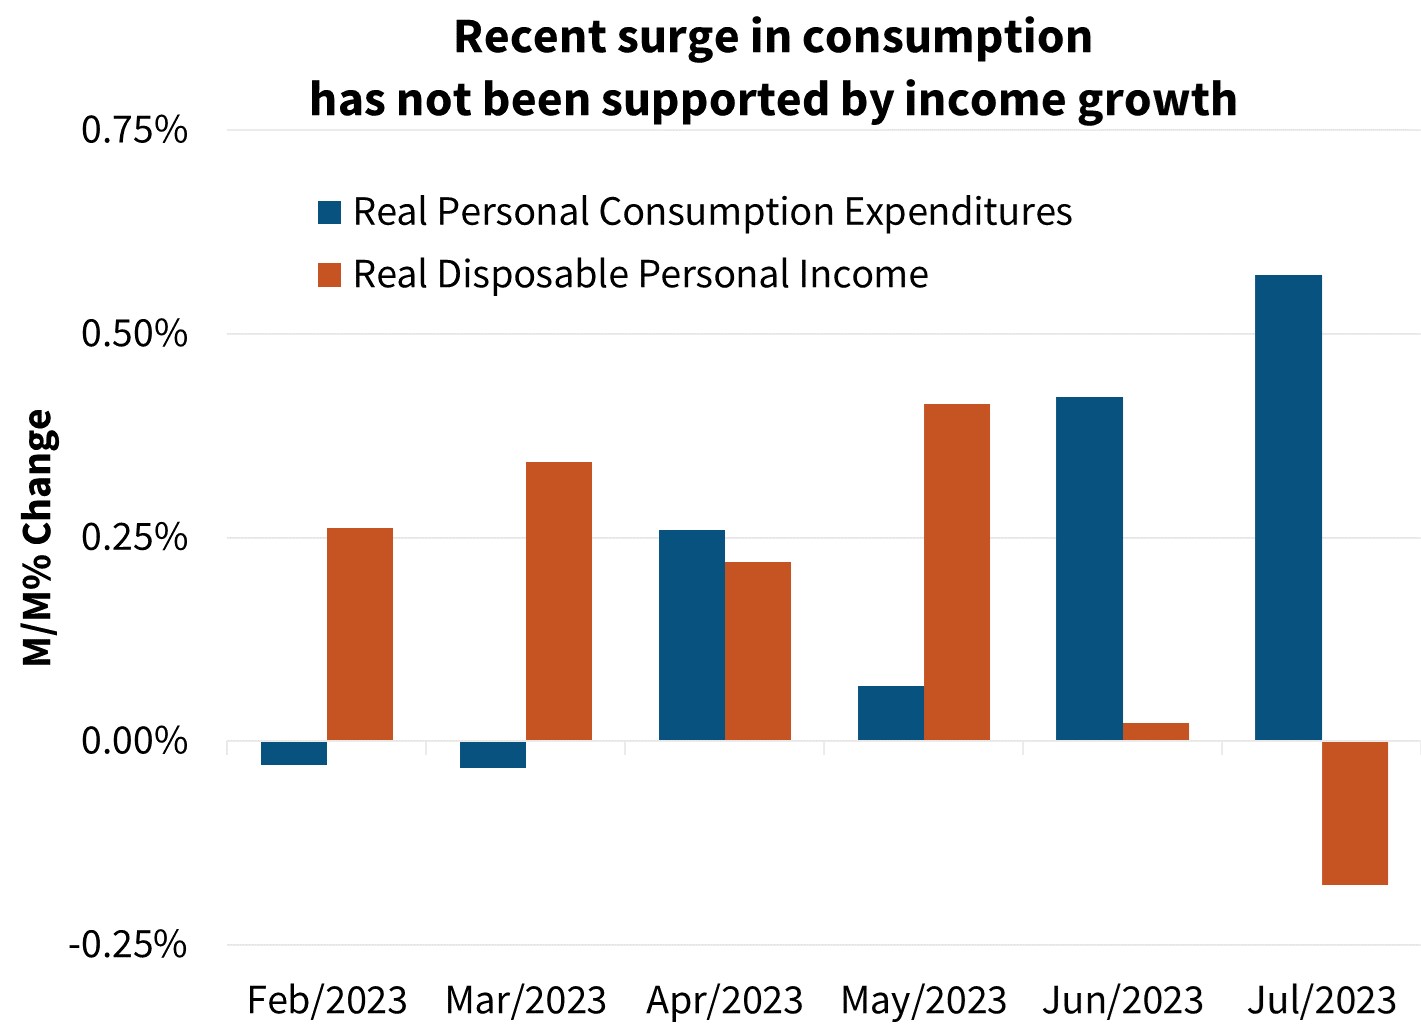  Recent surge in consumption has not been supported by income growth 